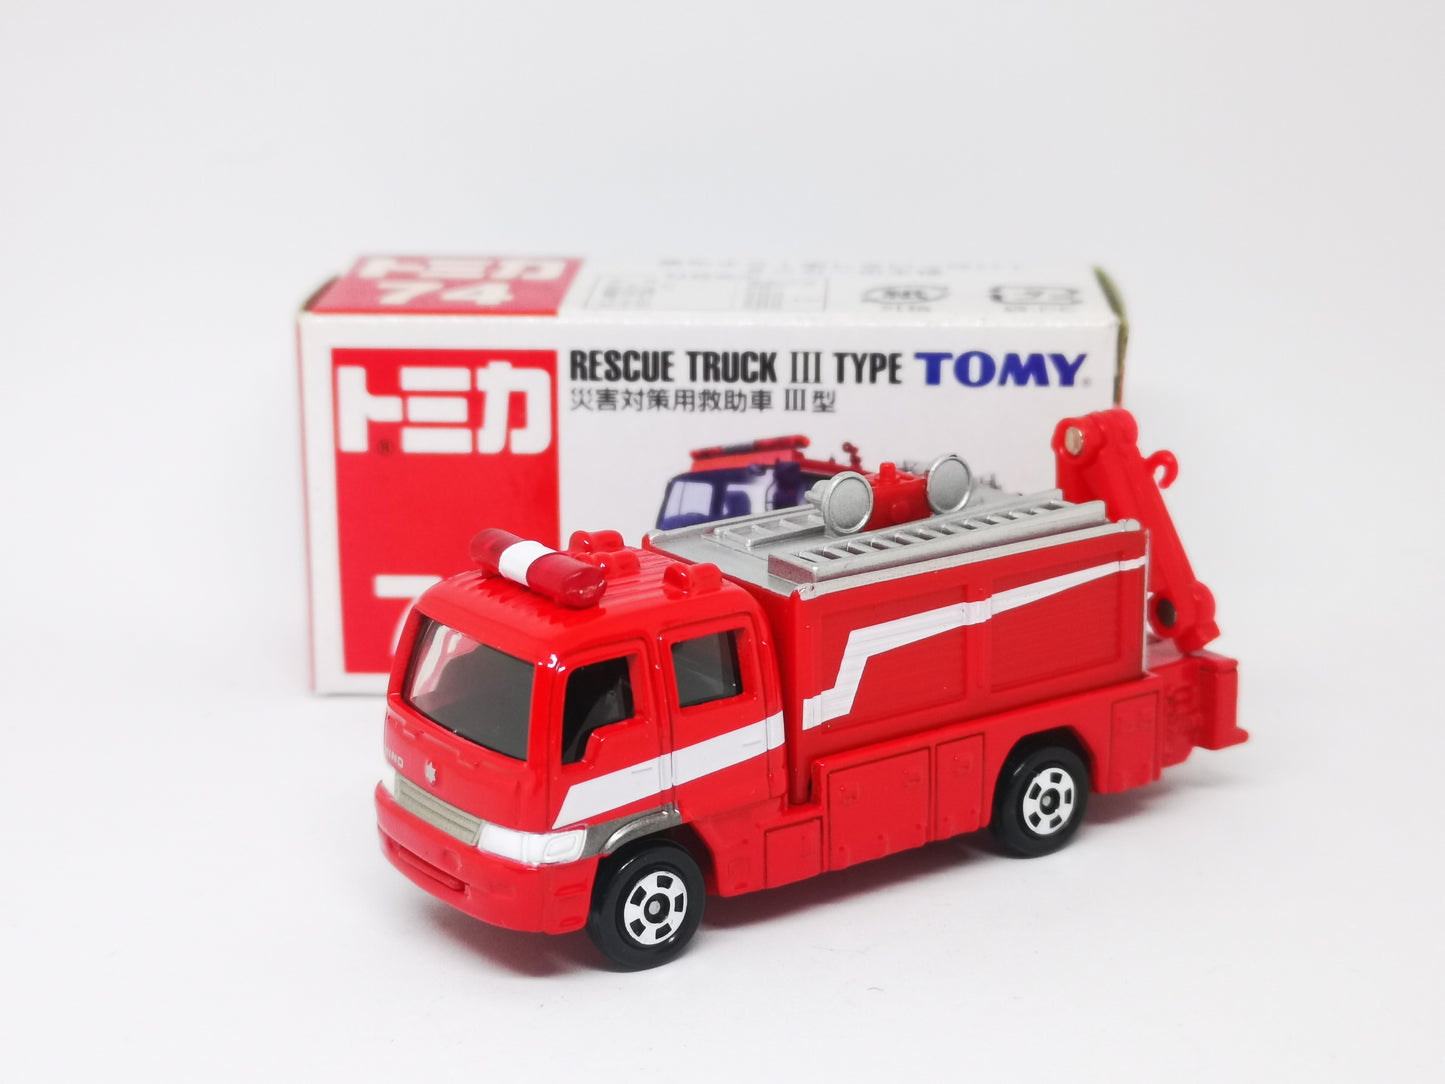 Tomica No.74 Japan Fire Engine Rescue Truck III Type